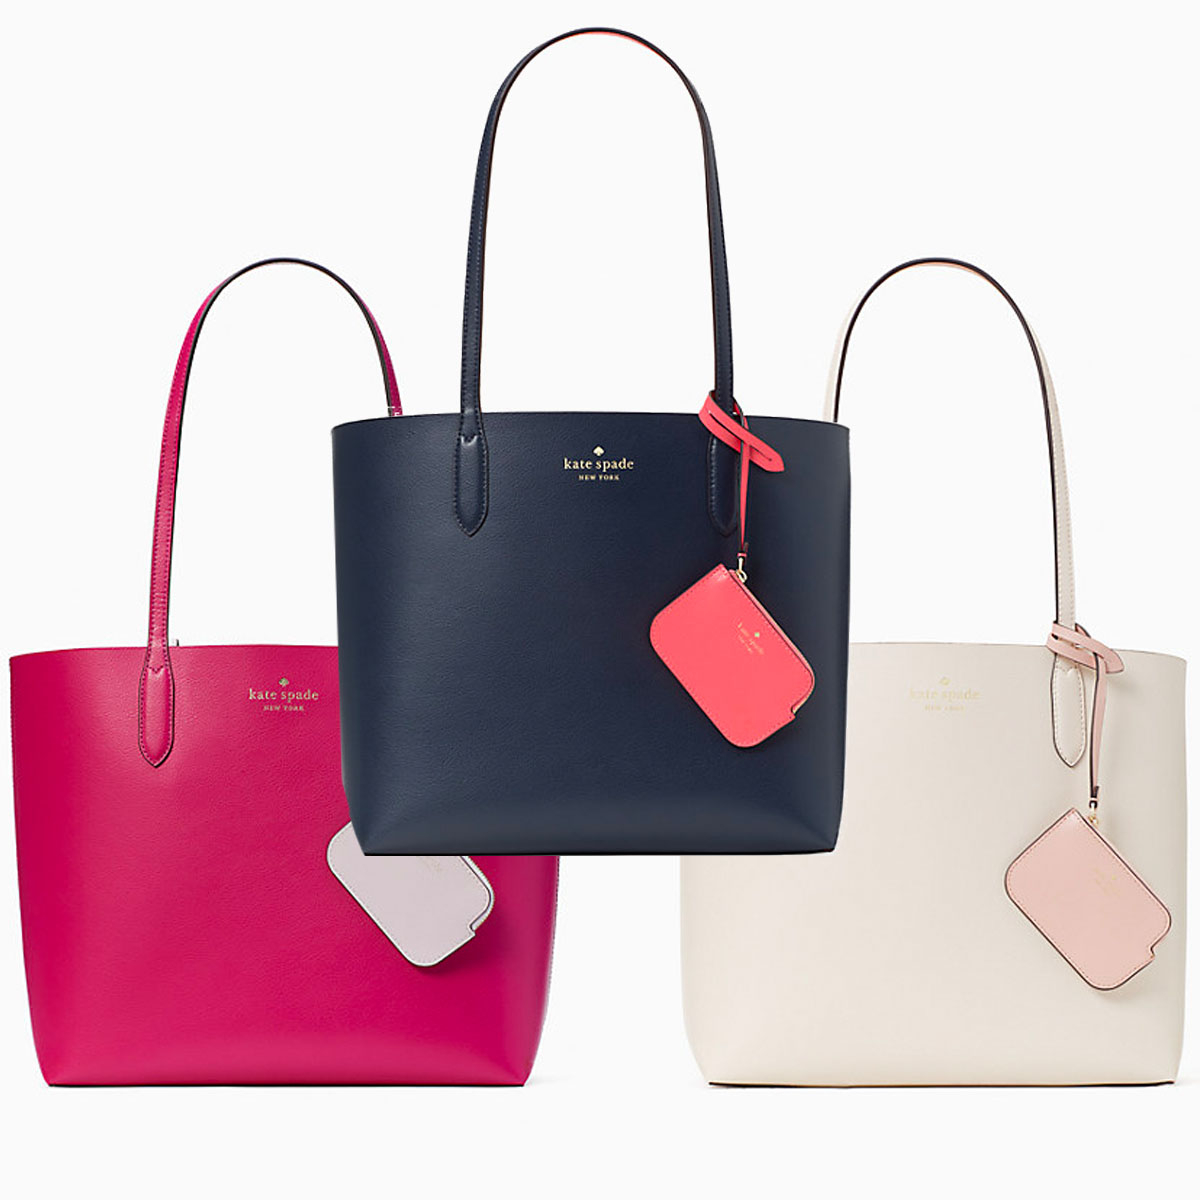 Today Only! This $360 Reversible Kate Spade Tote Is on Sale for $89 - Verve  times